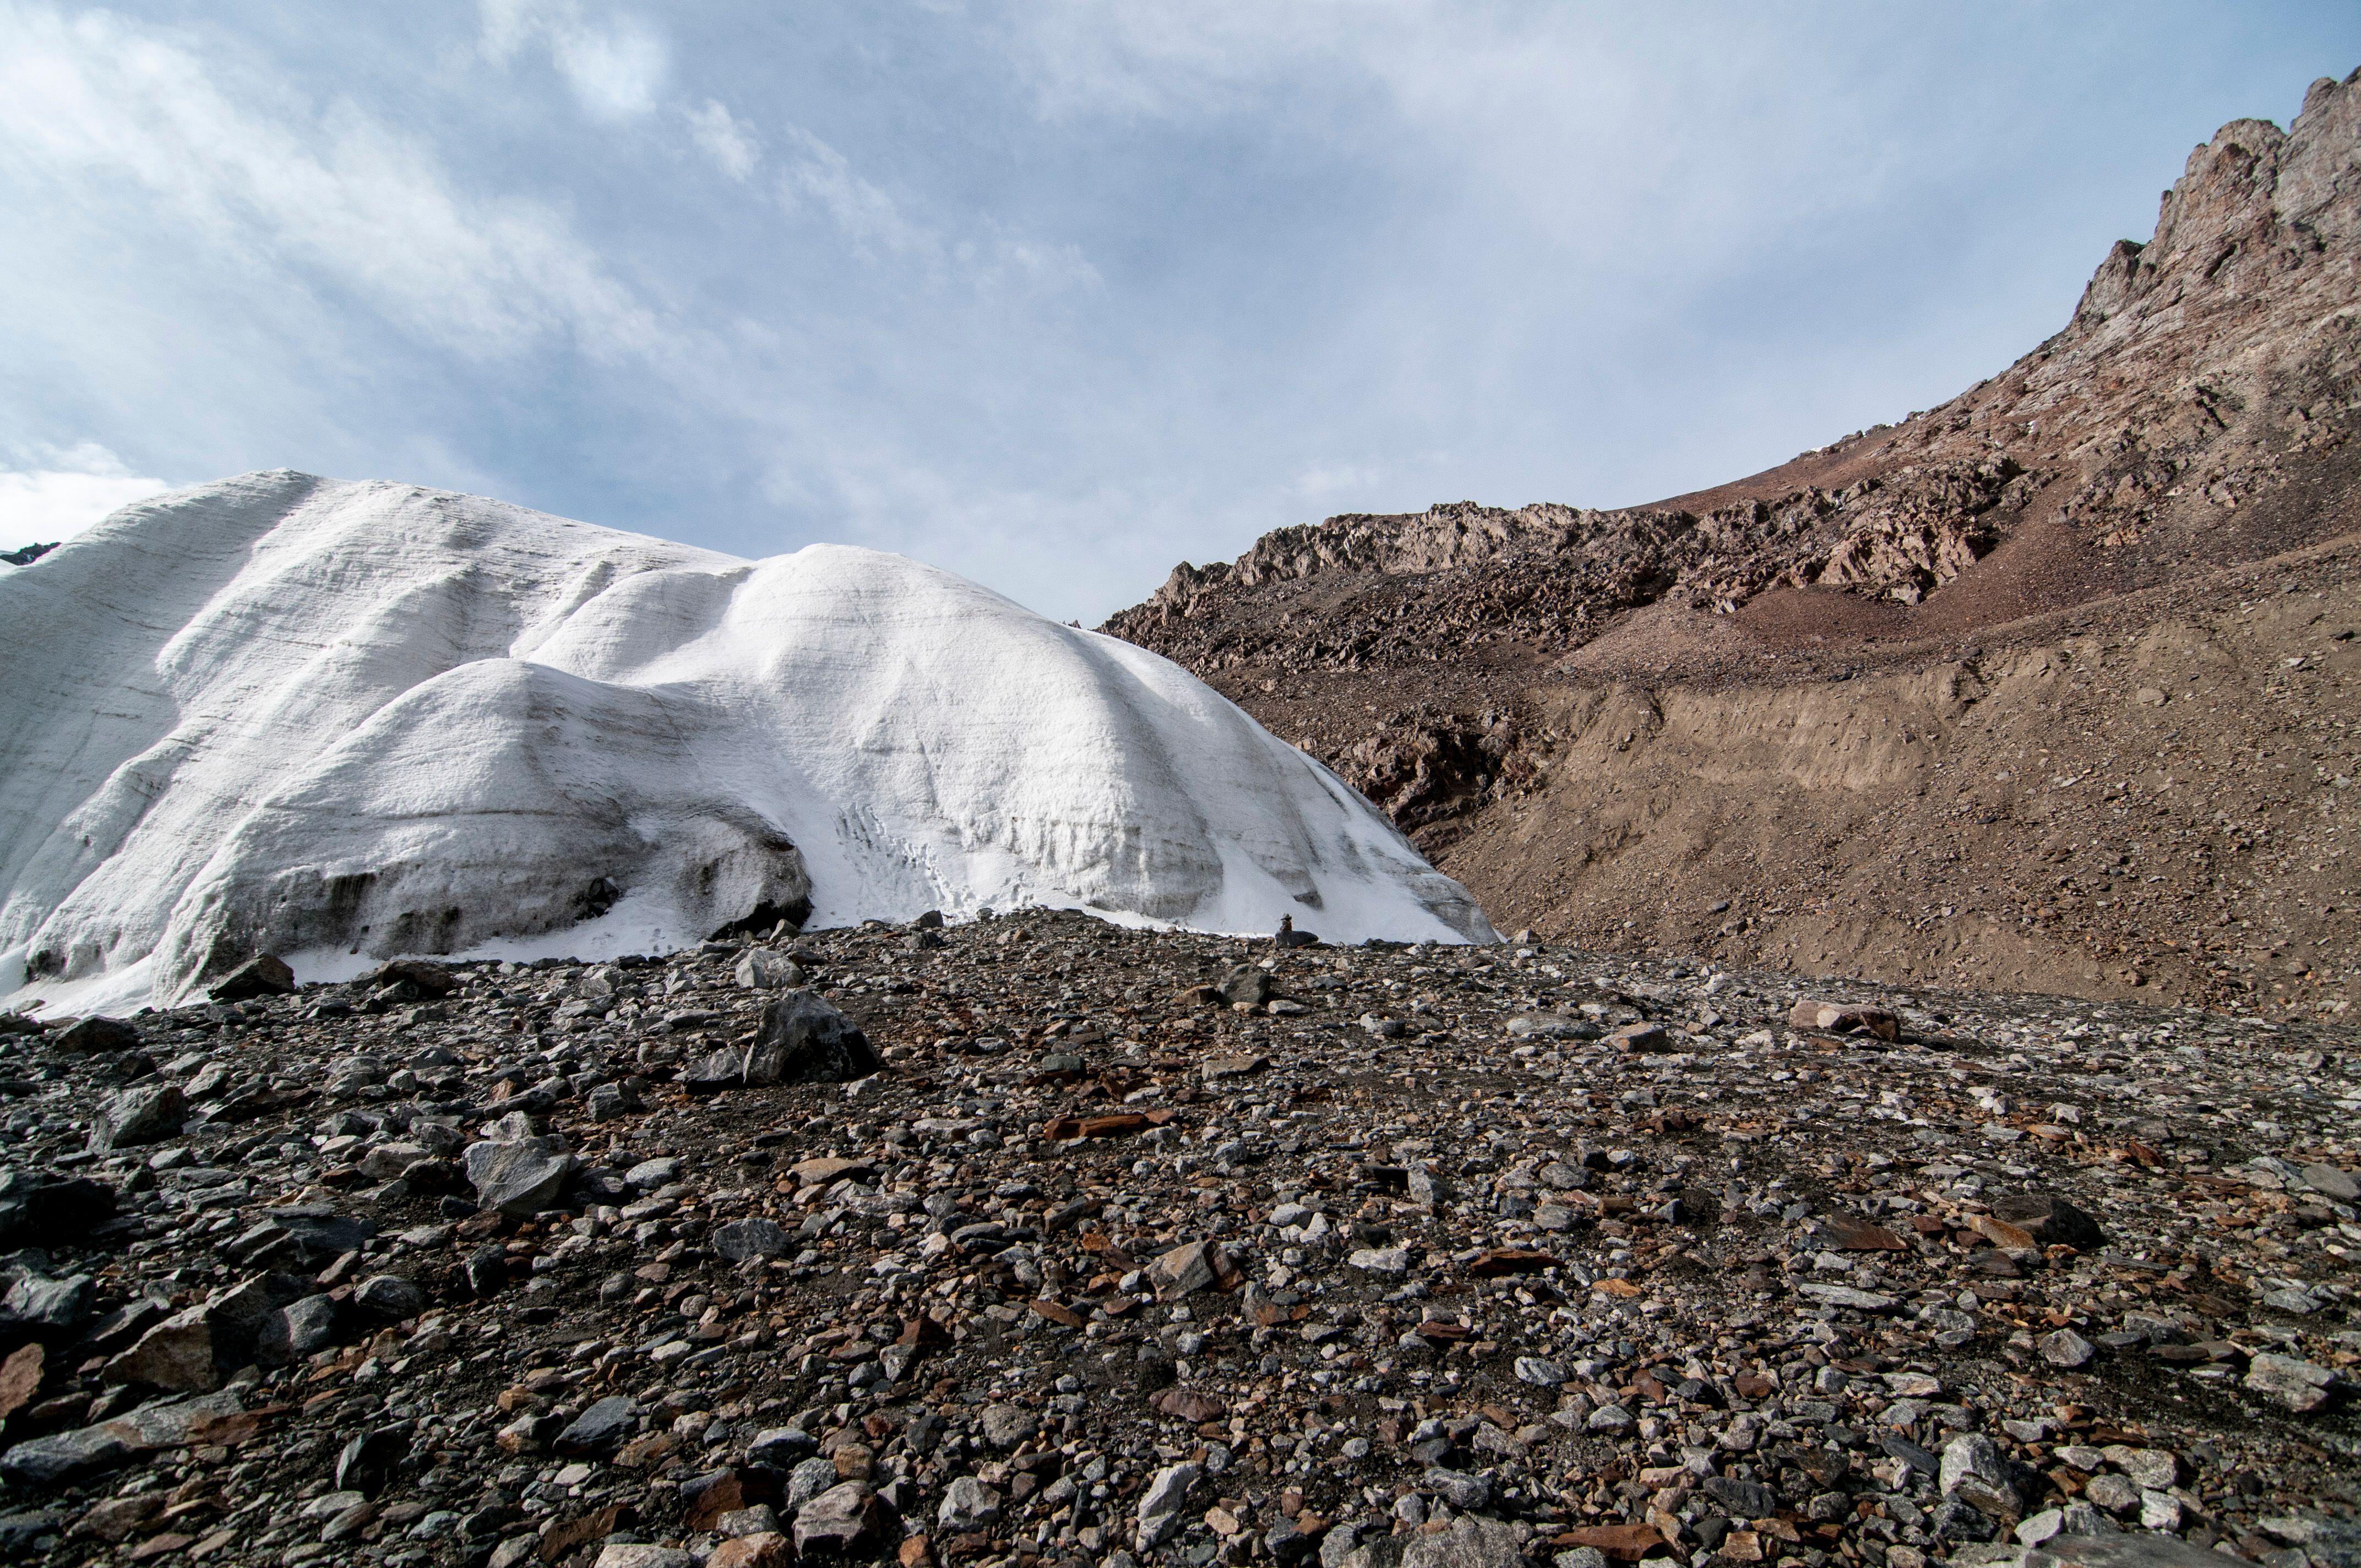 View of the retreated ice flow of the the Xinjiang Tianshan No 1 Glacier.